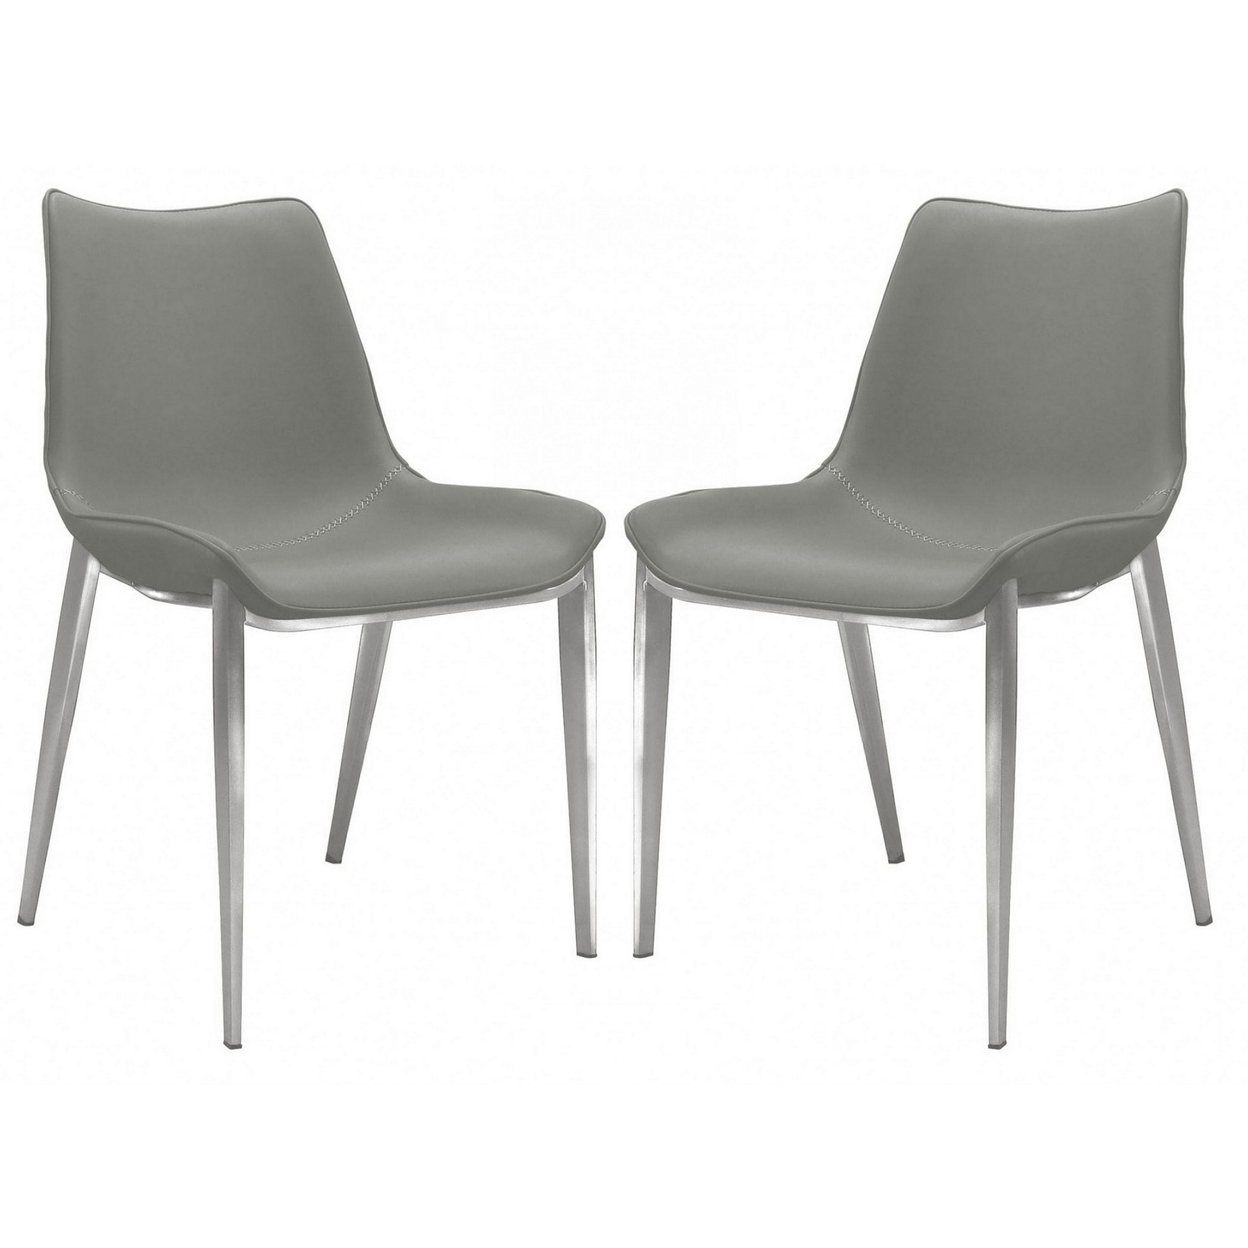 Armless Design Leatherette Dining Chair With Plastic Glider, Set Of 2,Gray- Saltoro Sherpi